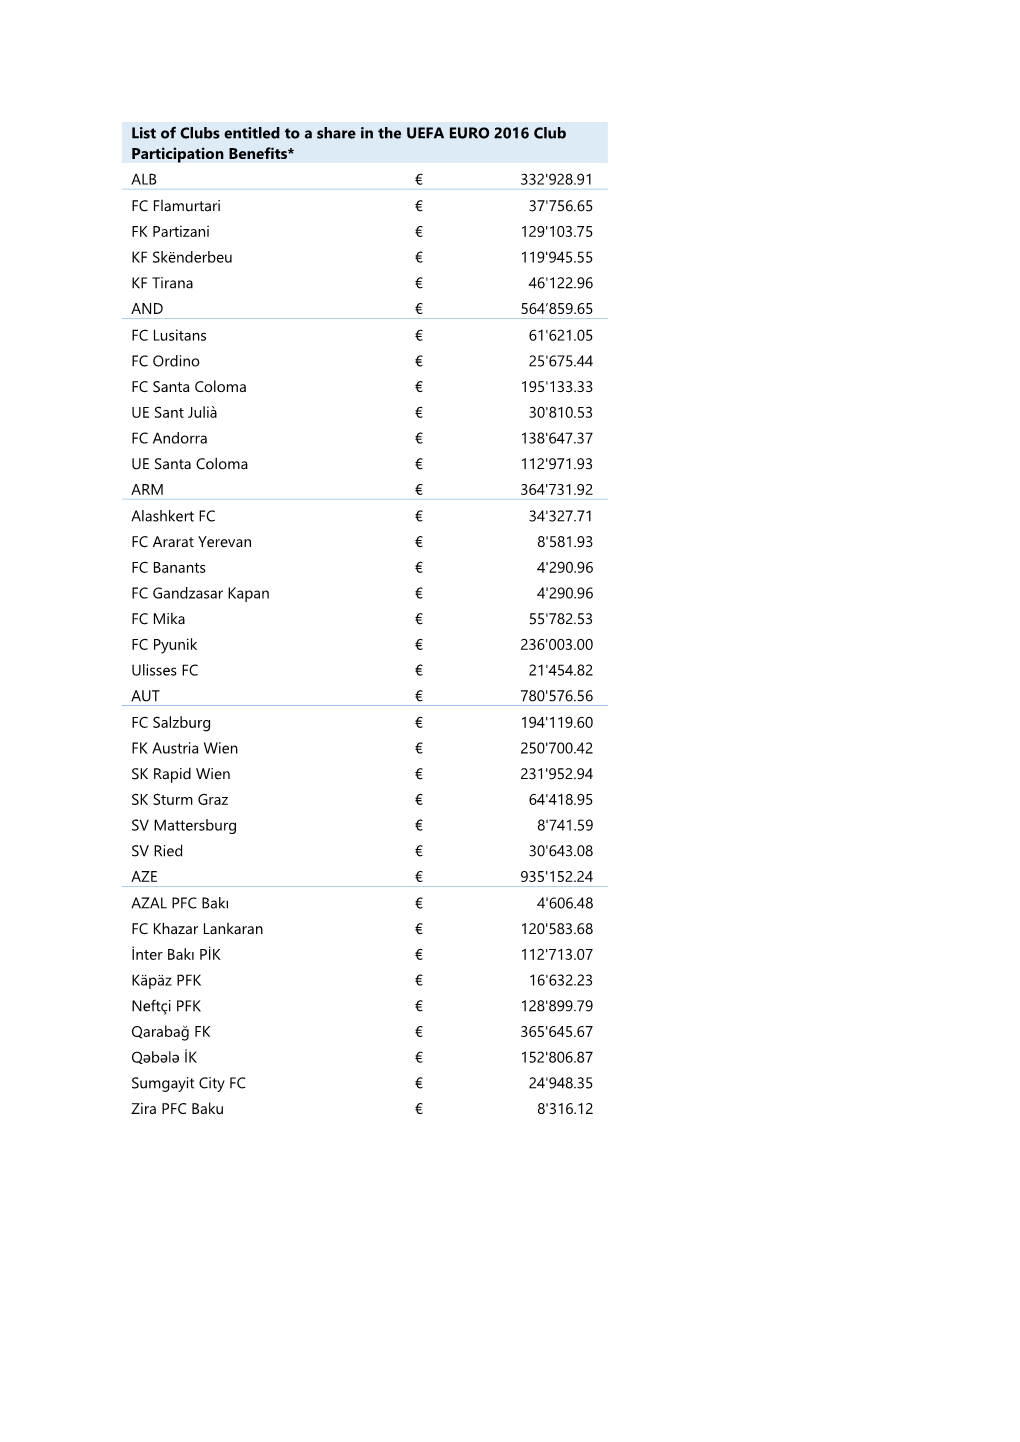 List of Clubs Entitled to a Share in the UEFA EURO 2016 Club